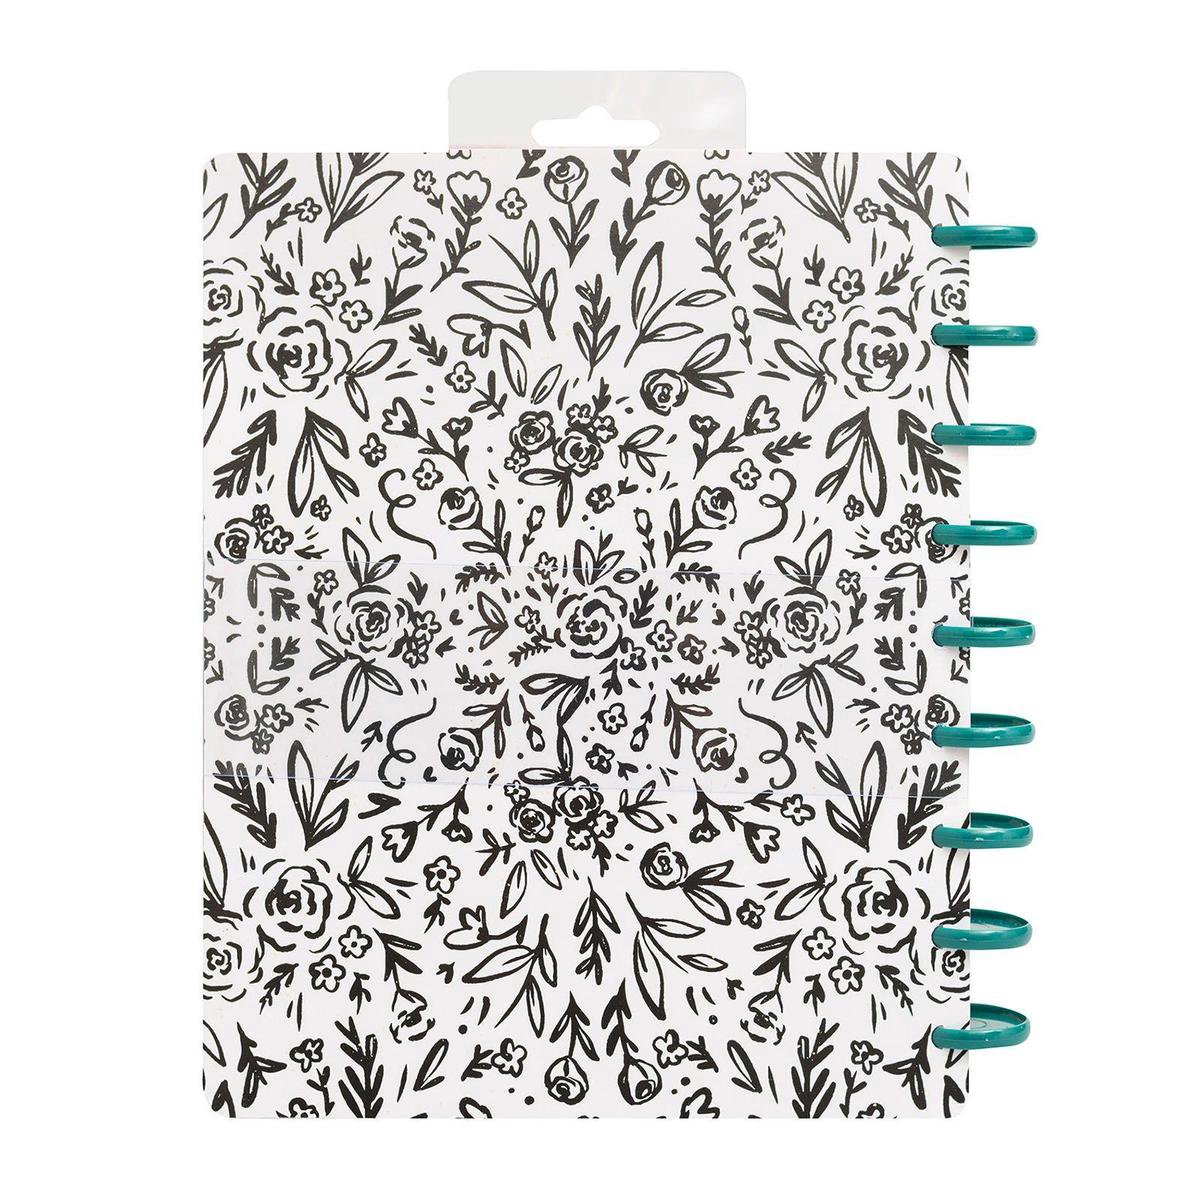 Crate Paper Day-to-Day DIY Planner - Dashboard - Black and White floral - 99 stuks